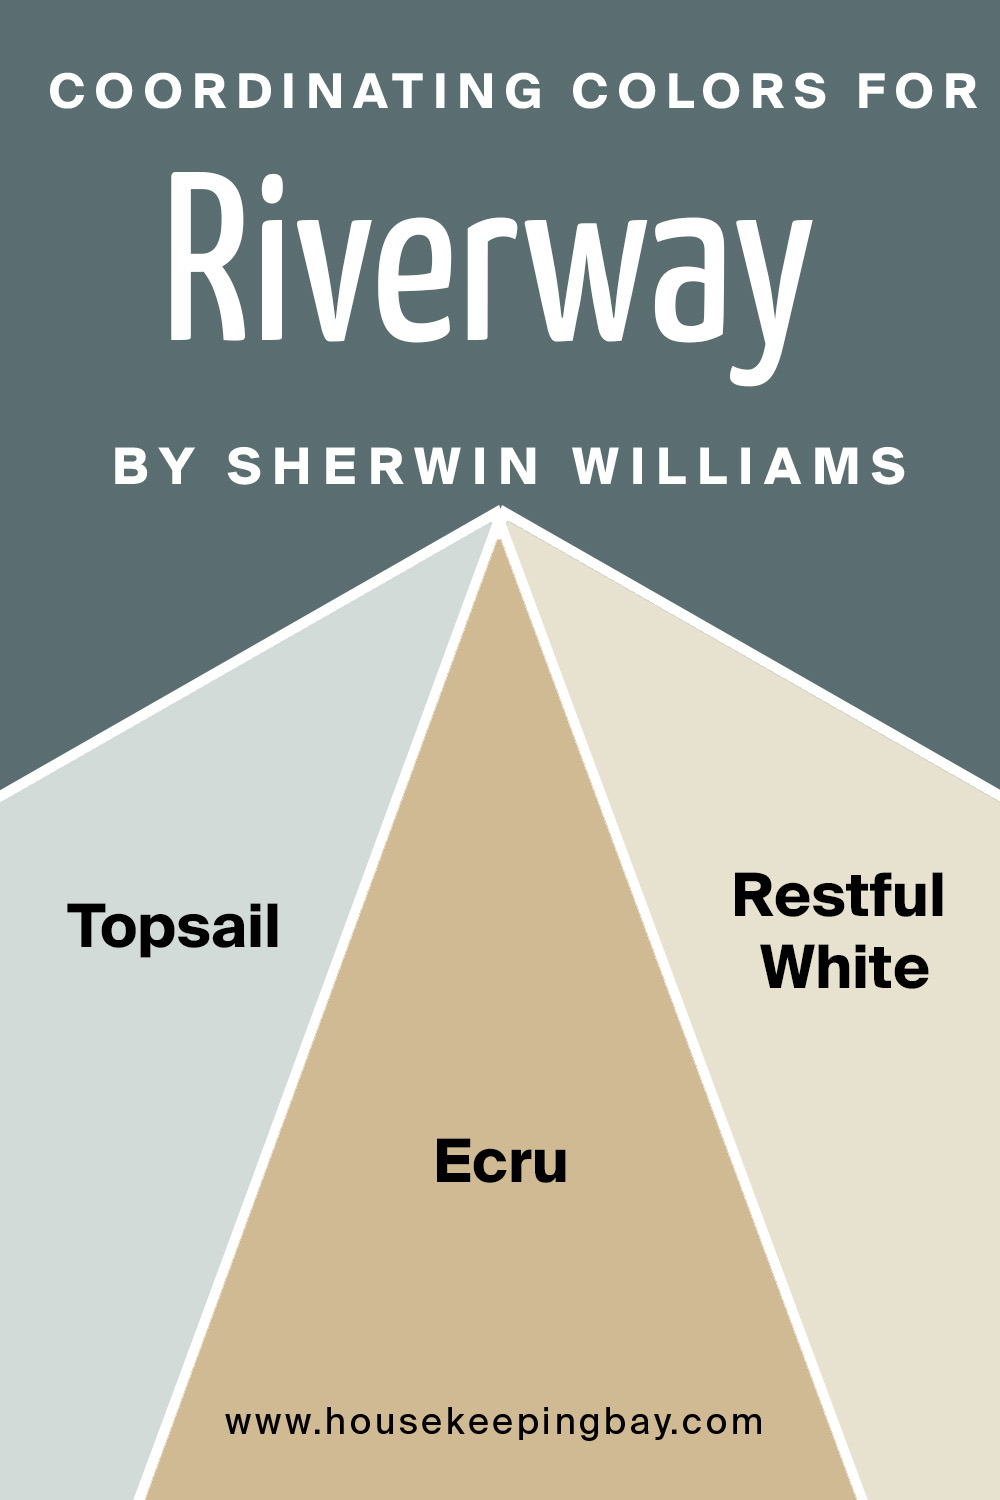 riverway by sherwin williams coordinating colors